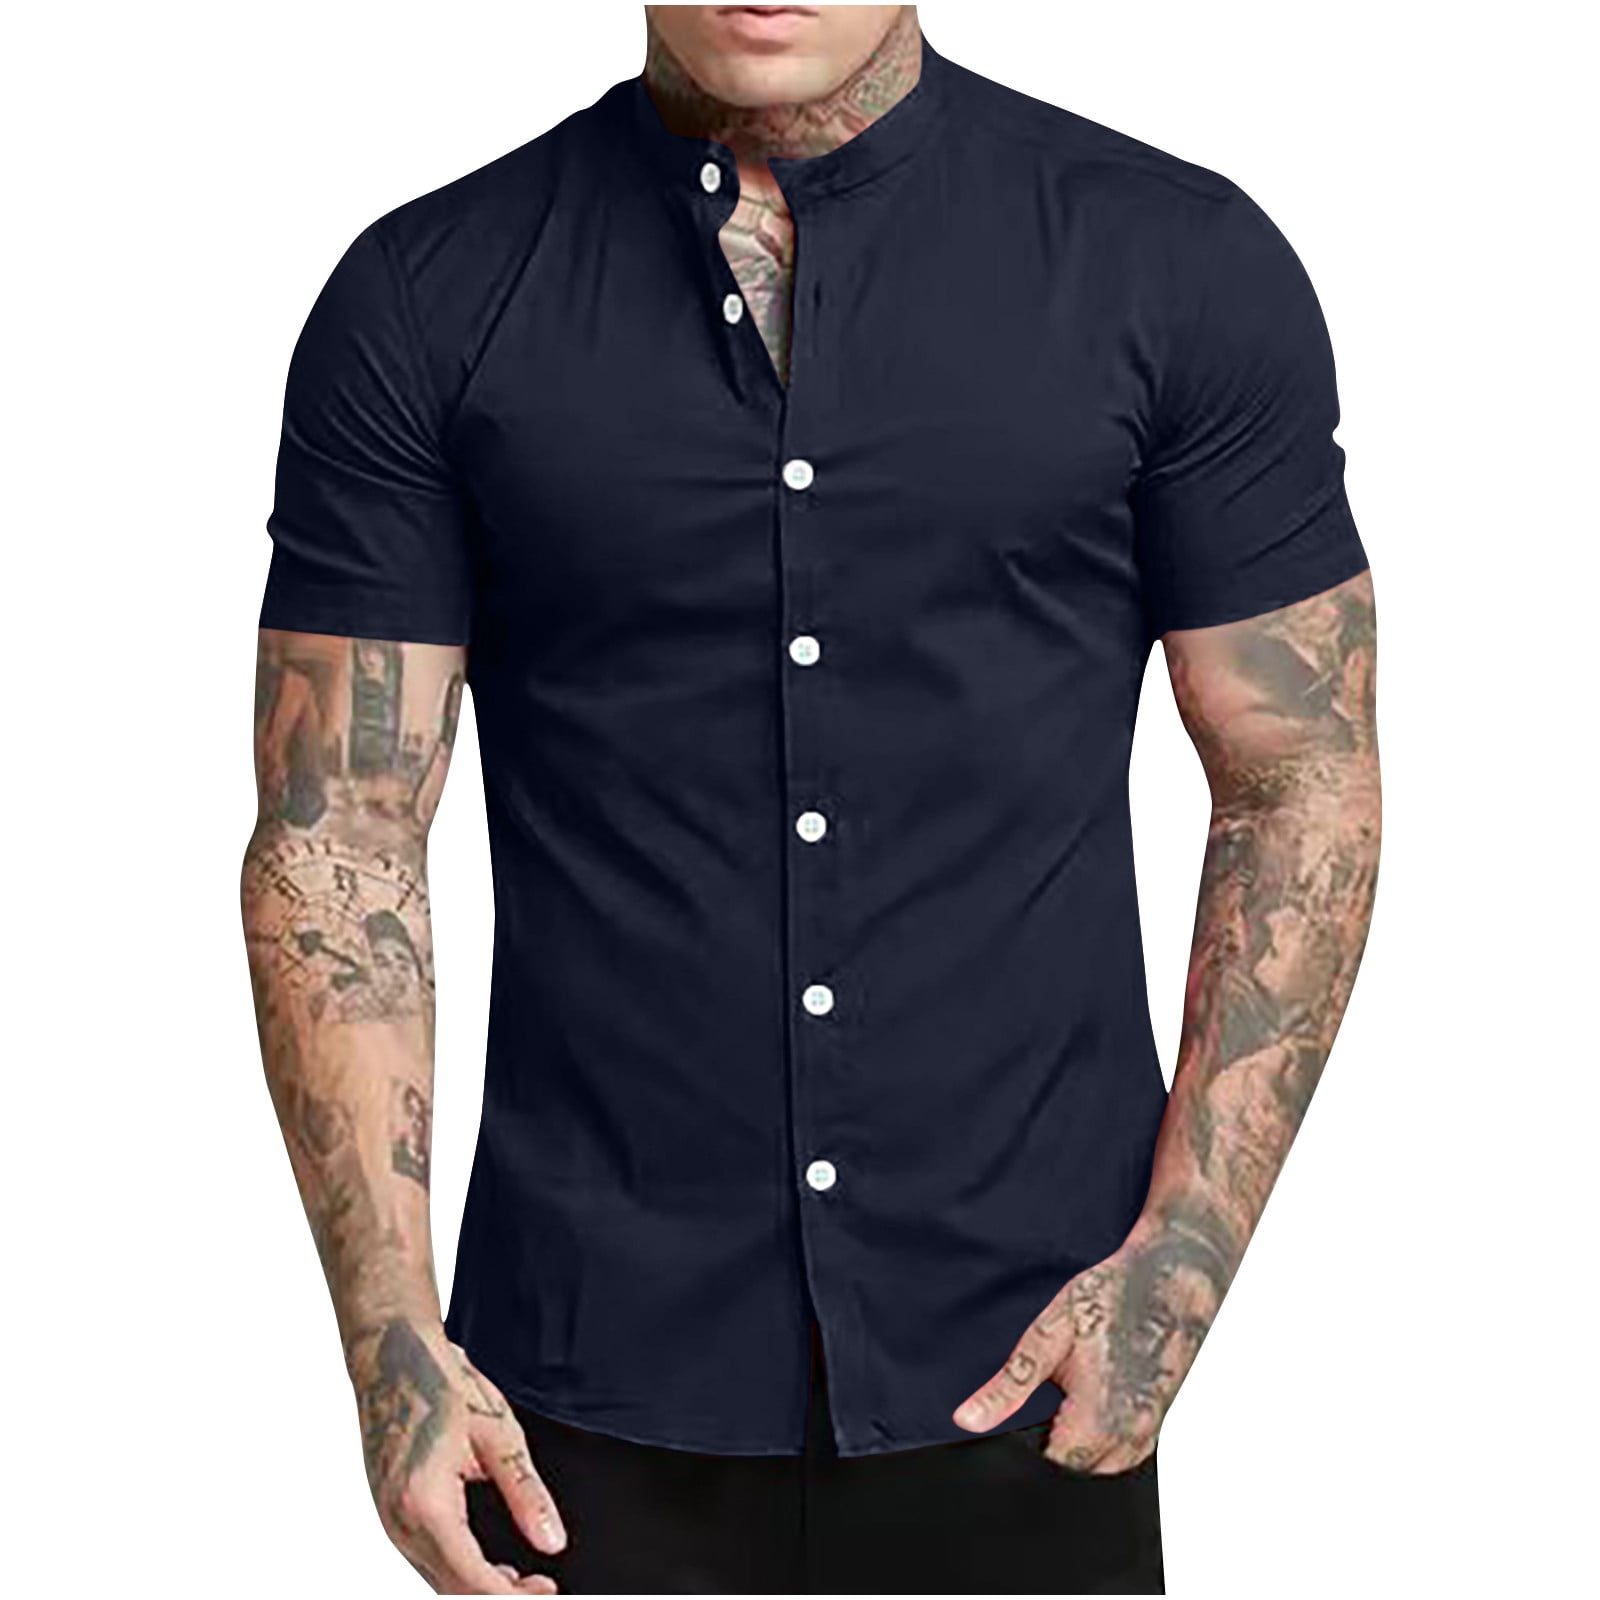 VSSSJ Shirts for Men Big and Tall Solid Color Short Sleeve Casual ...